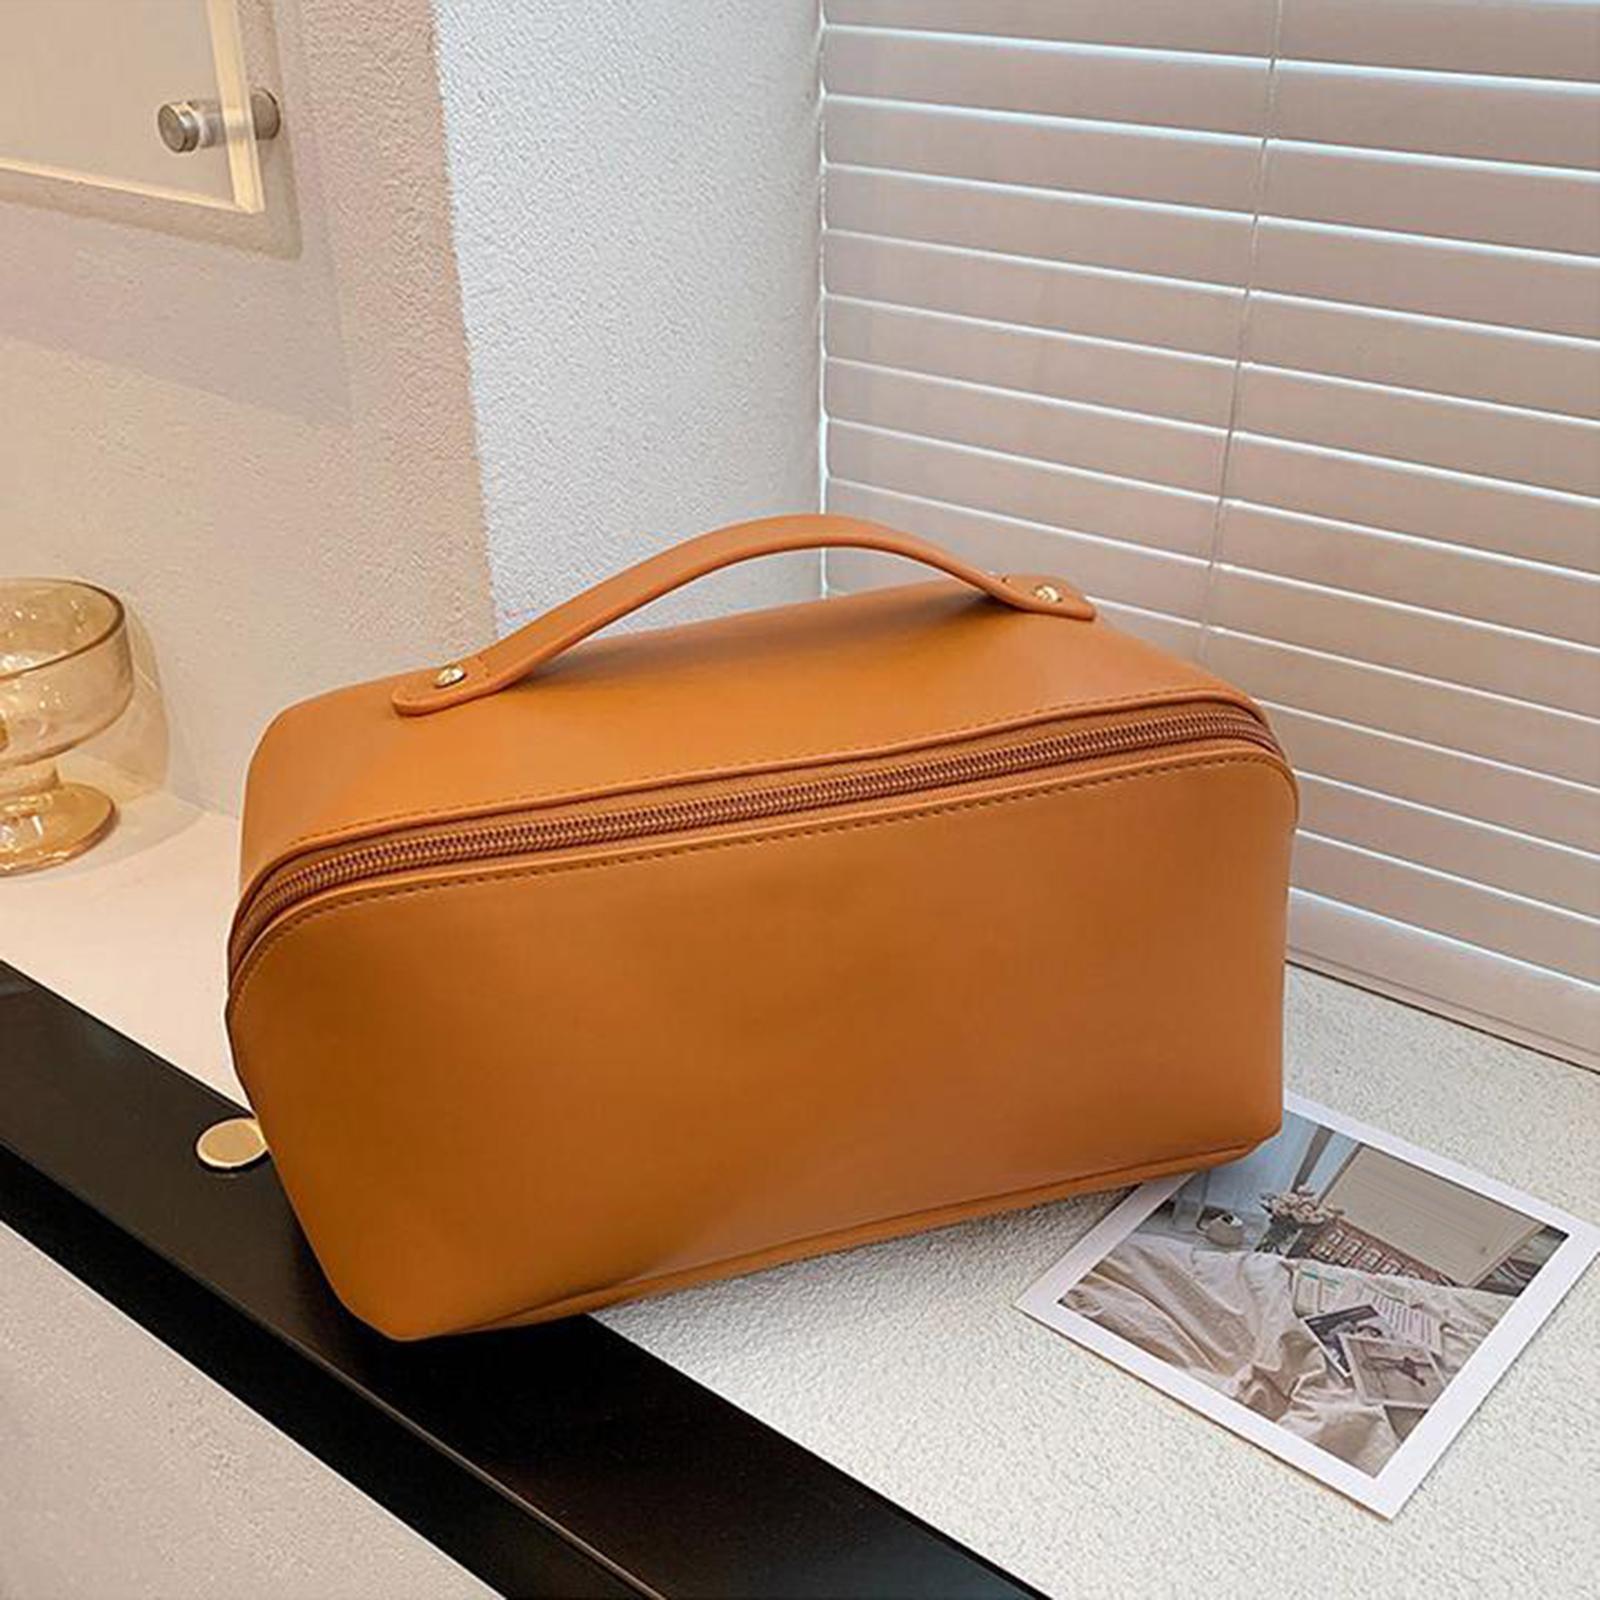 Portable PU Leather Travel Toiletry Bag Toiletry Purse Holder for Bathroom Brown